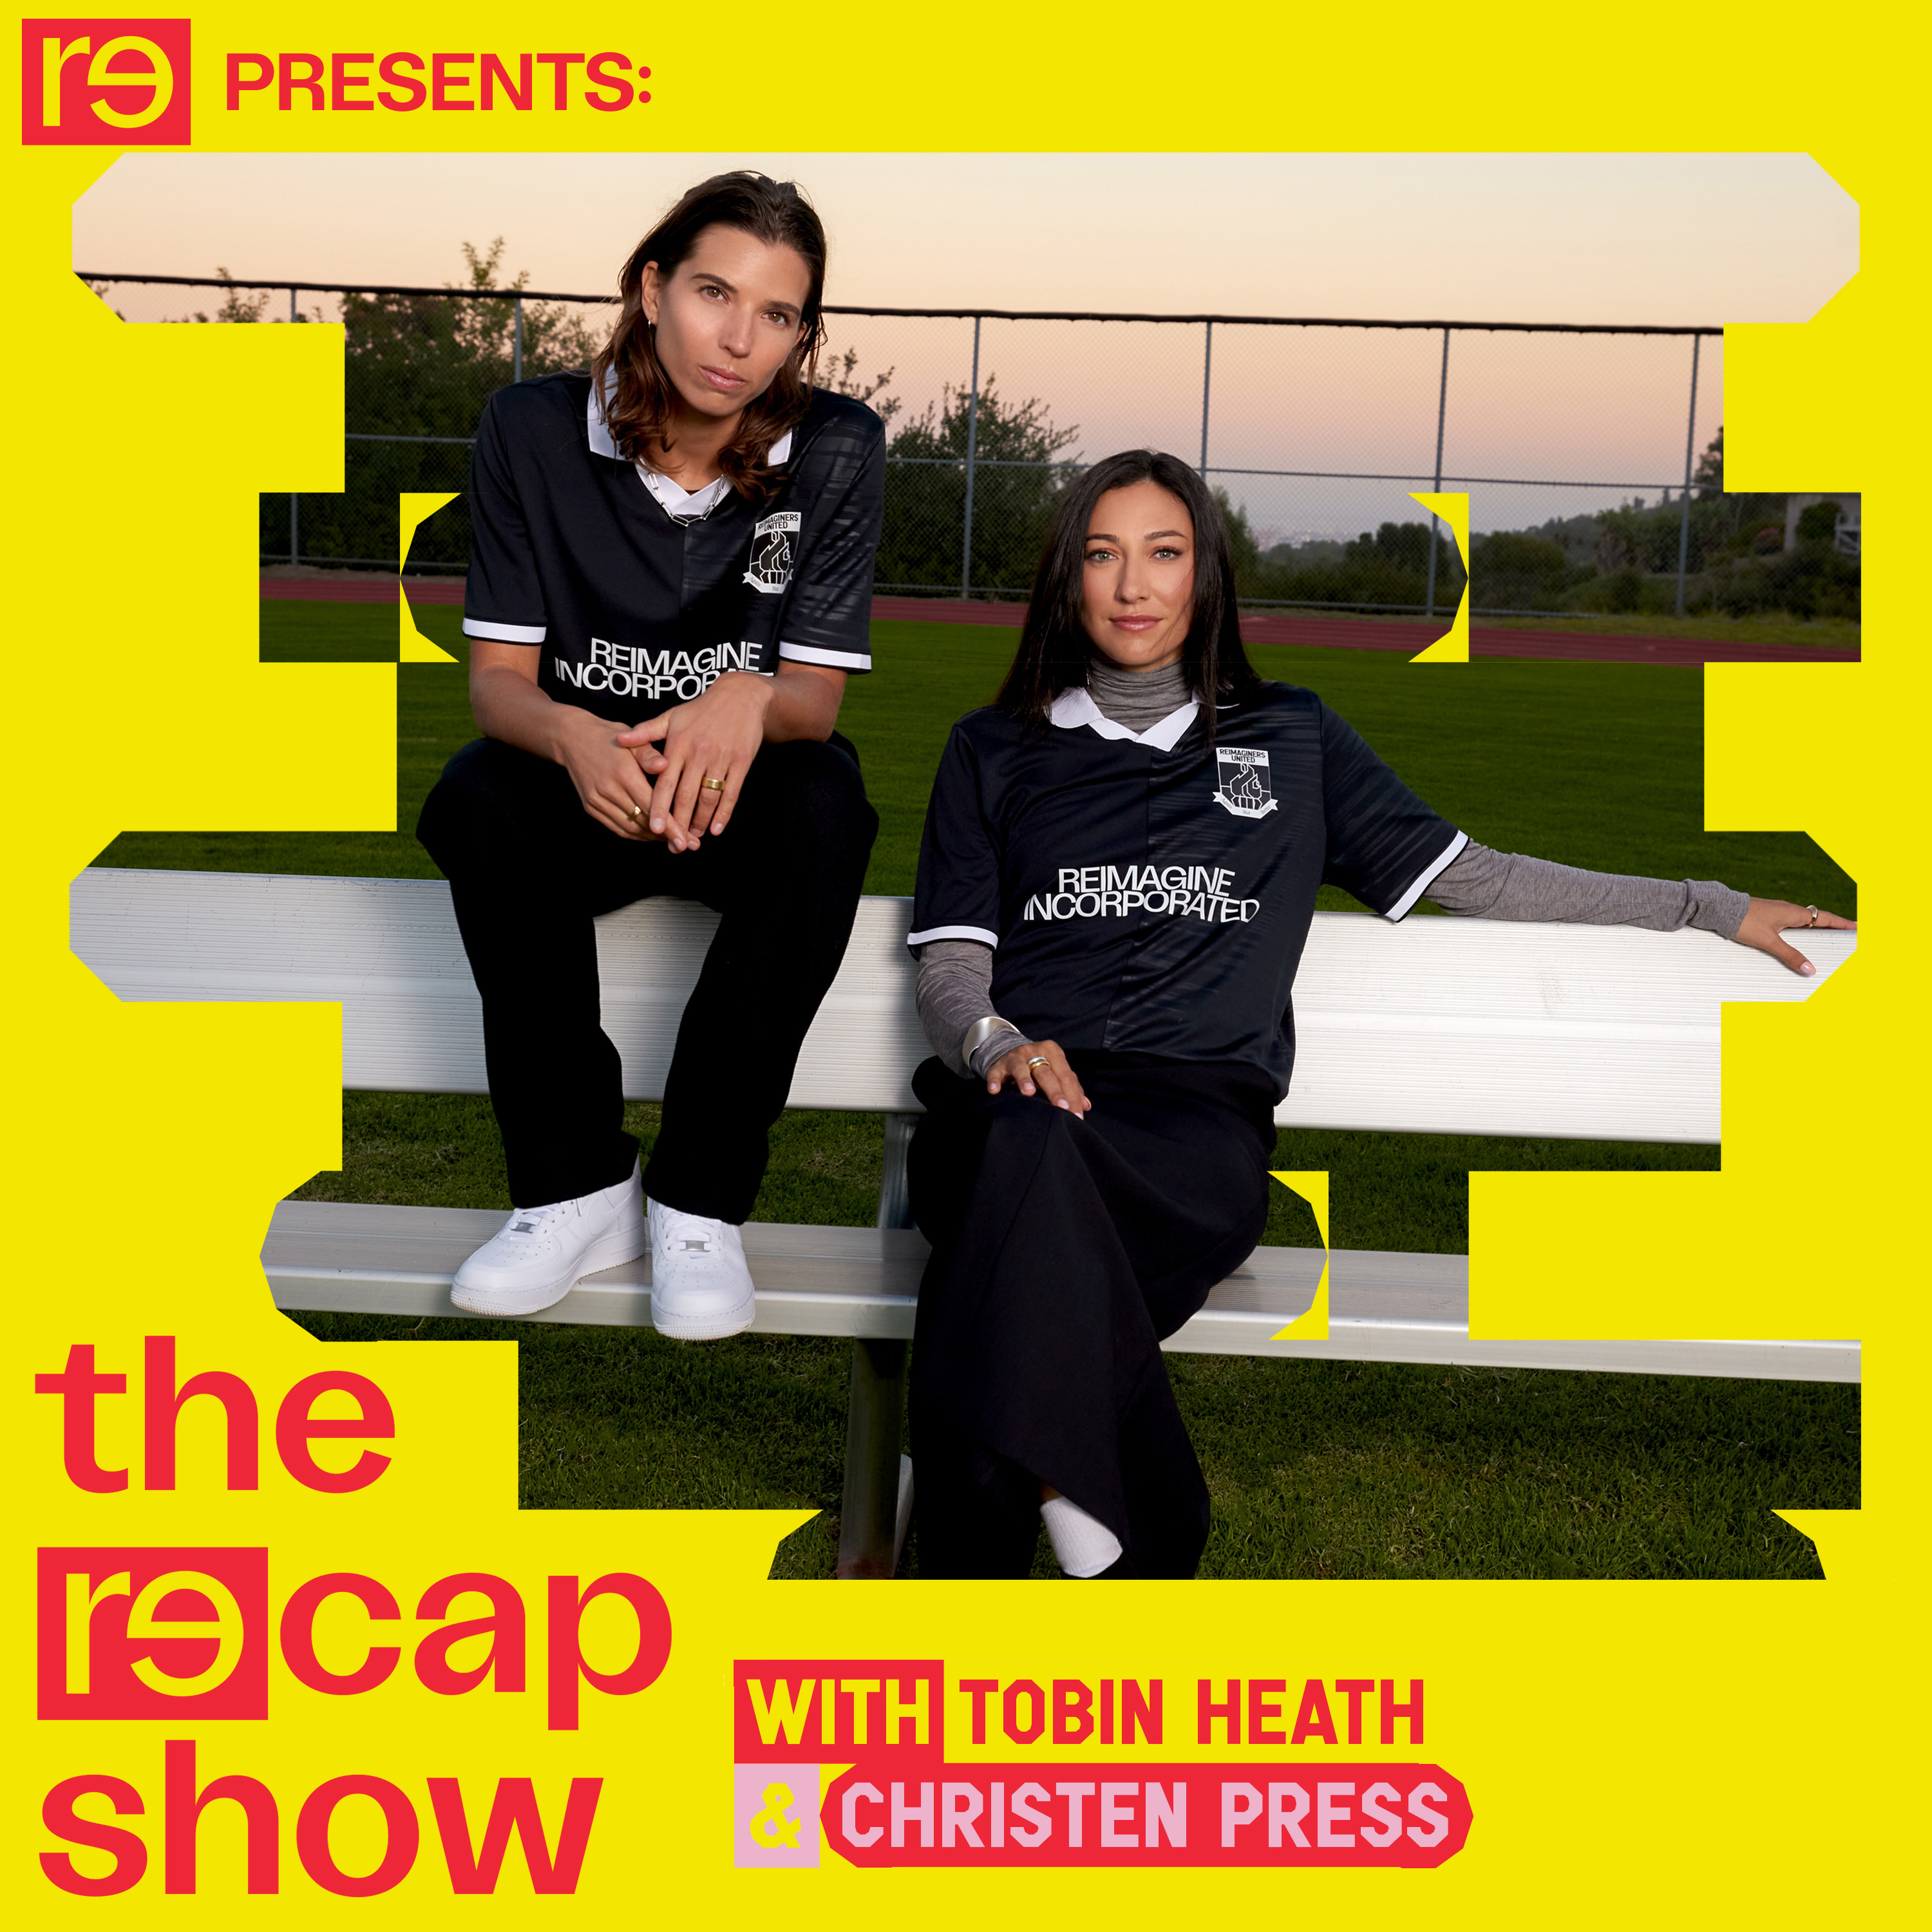 The RE—CAP Show podcast show image